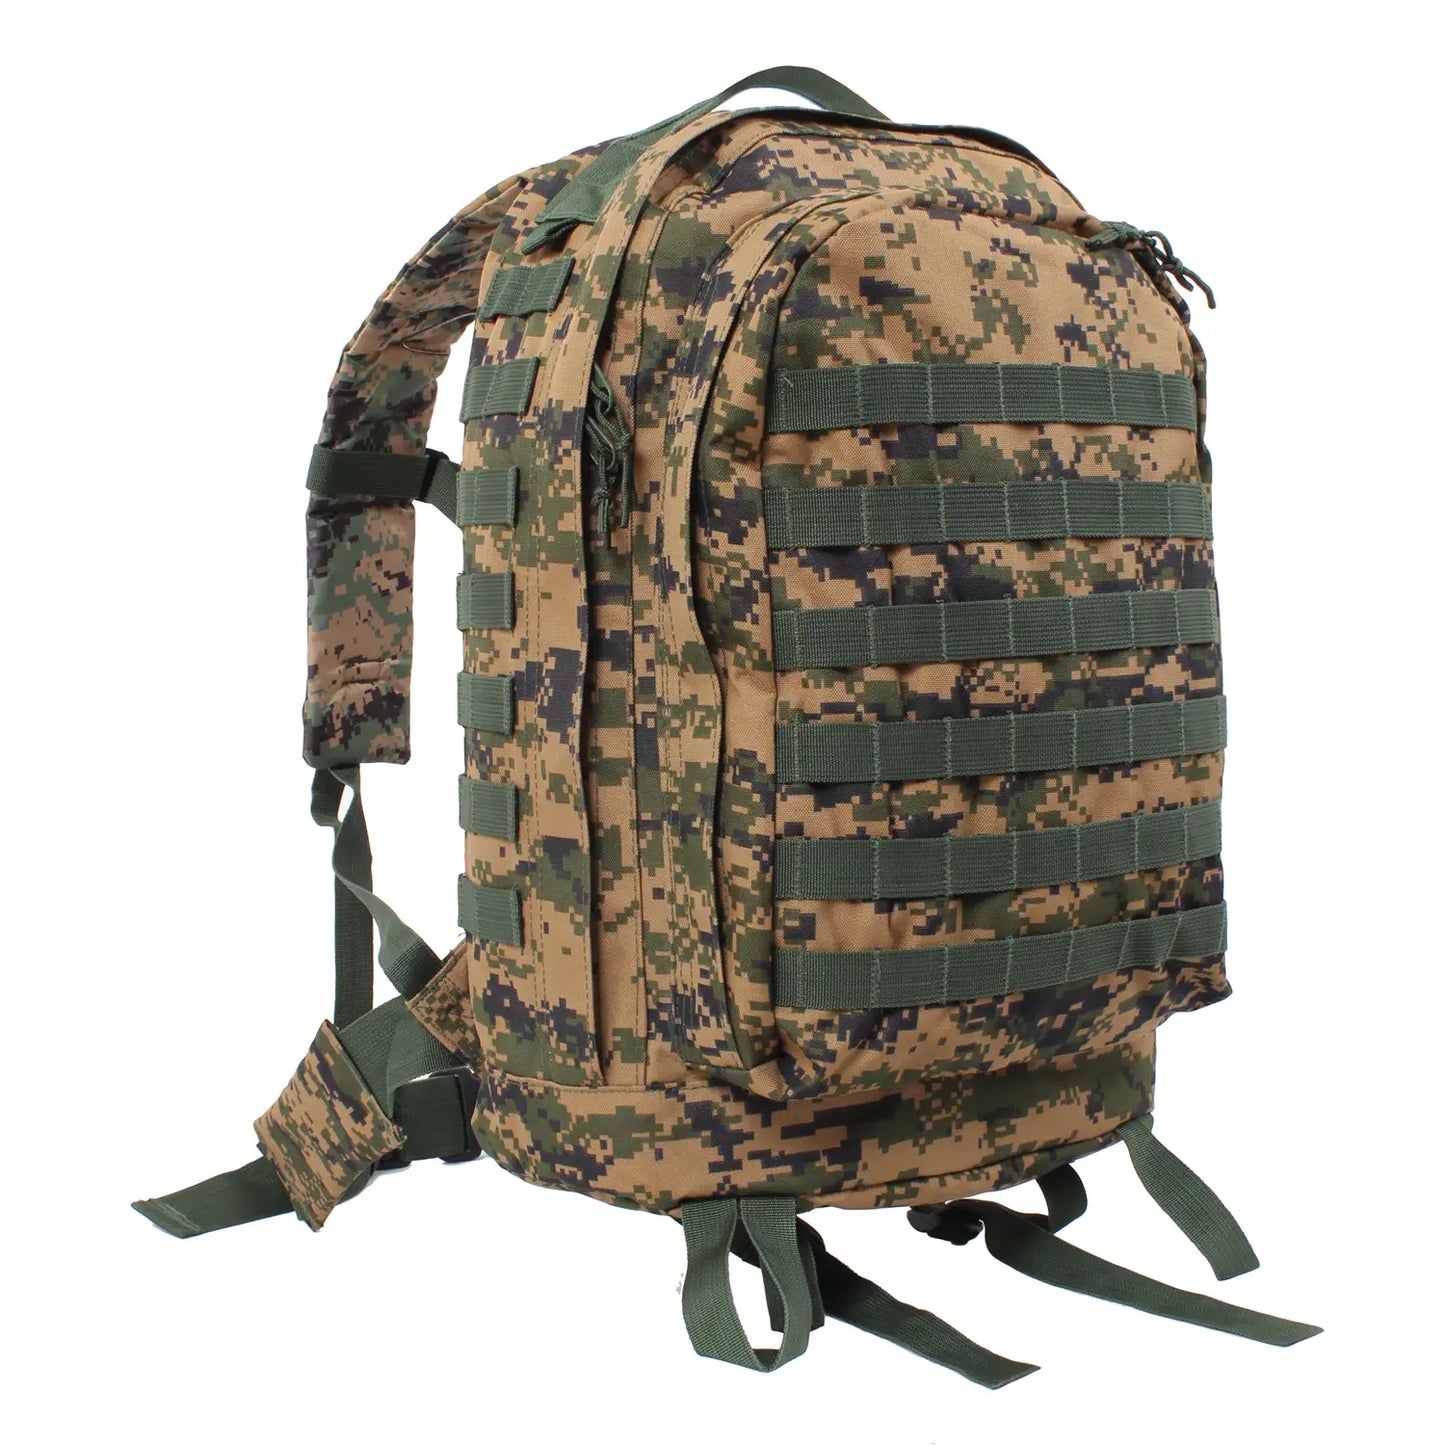 Rothco | MOLLE II 3 Day Assault Backpack